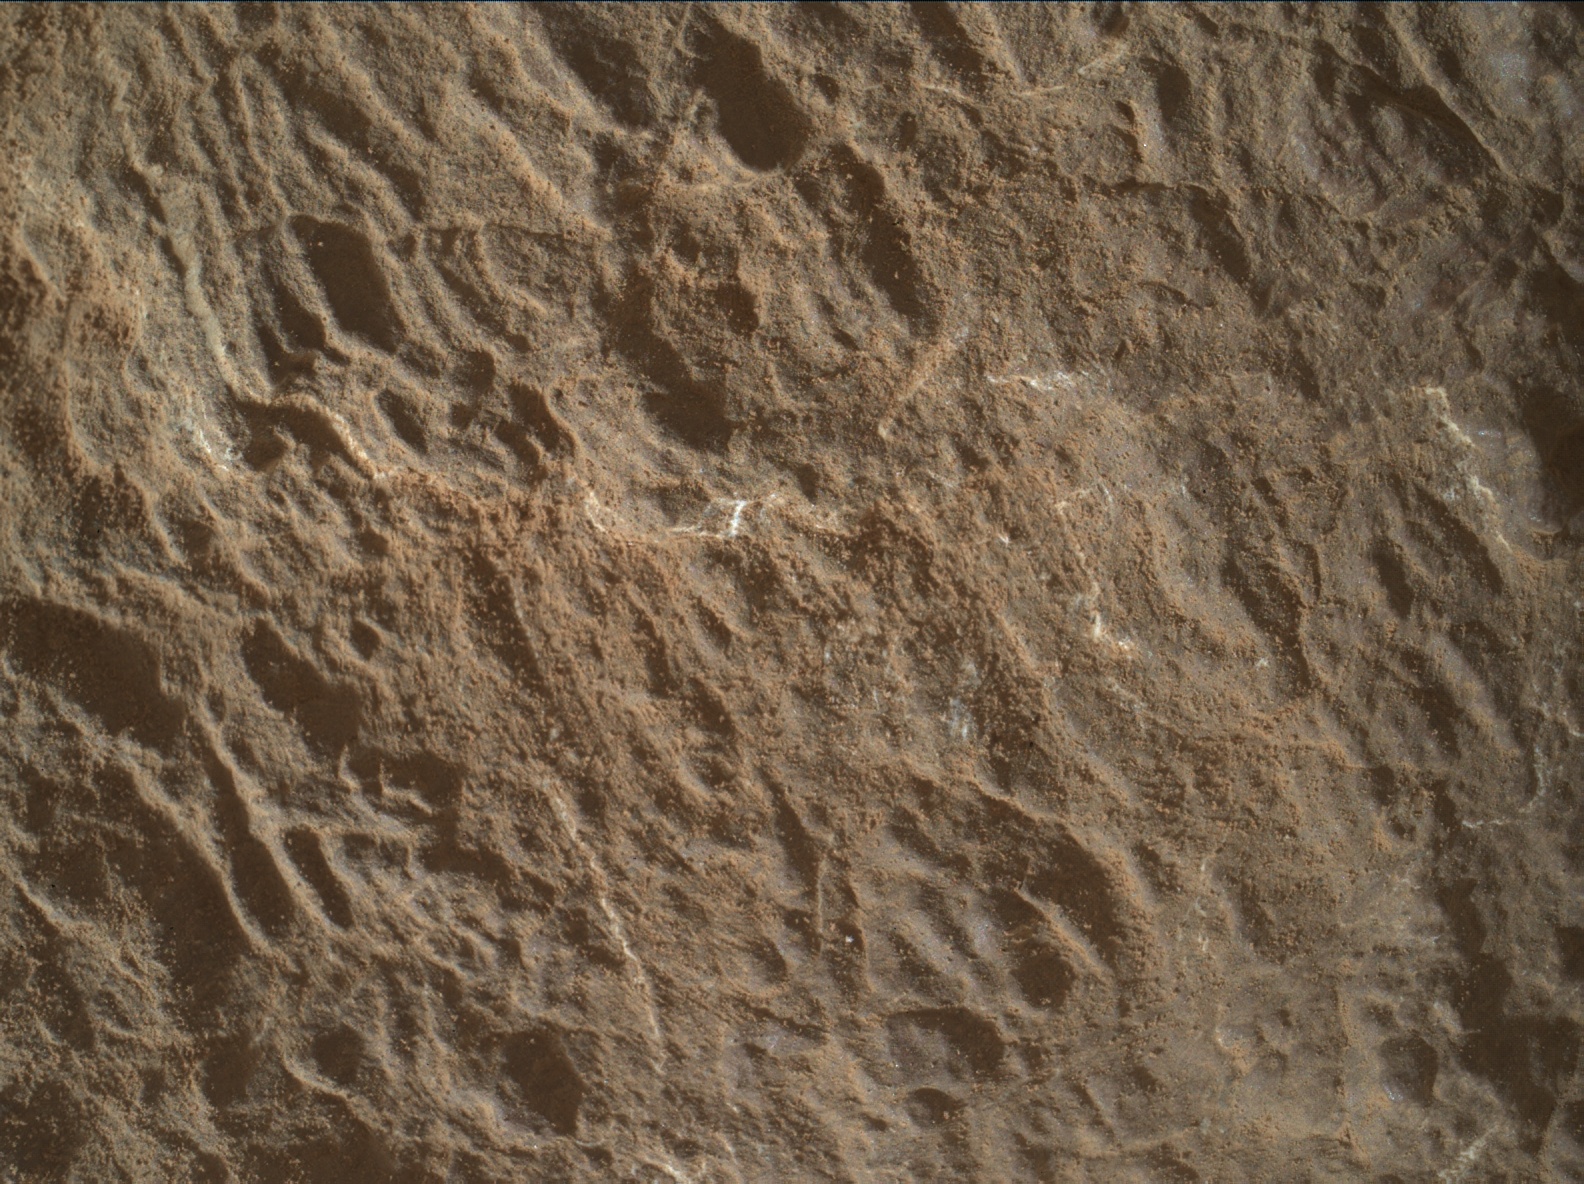 Nasa's Mars rover Curiosity acquired this image using its Mars Hand Lens Imager (MAHLI) on Sol 2450